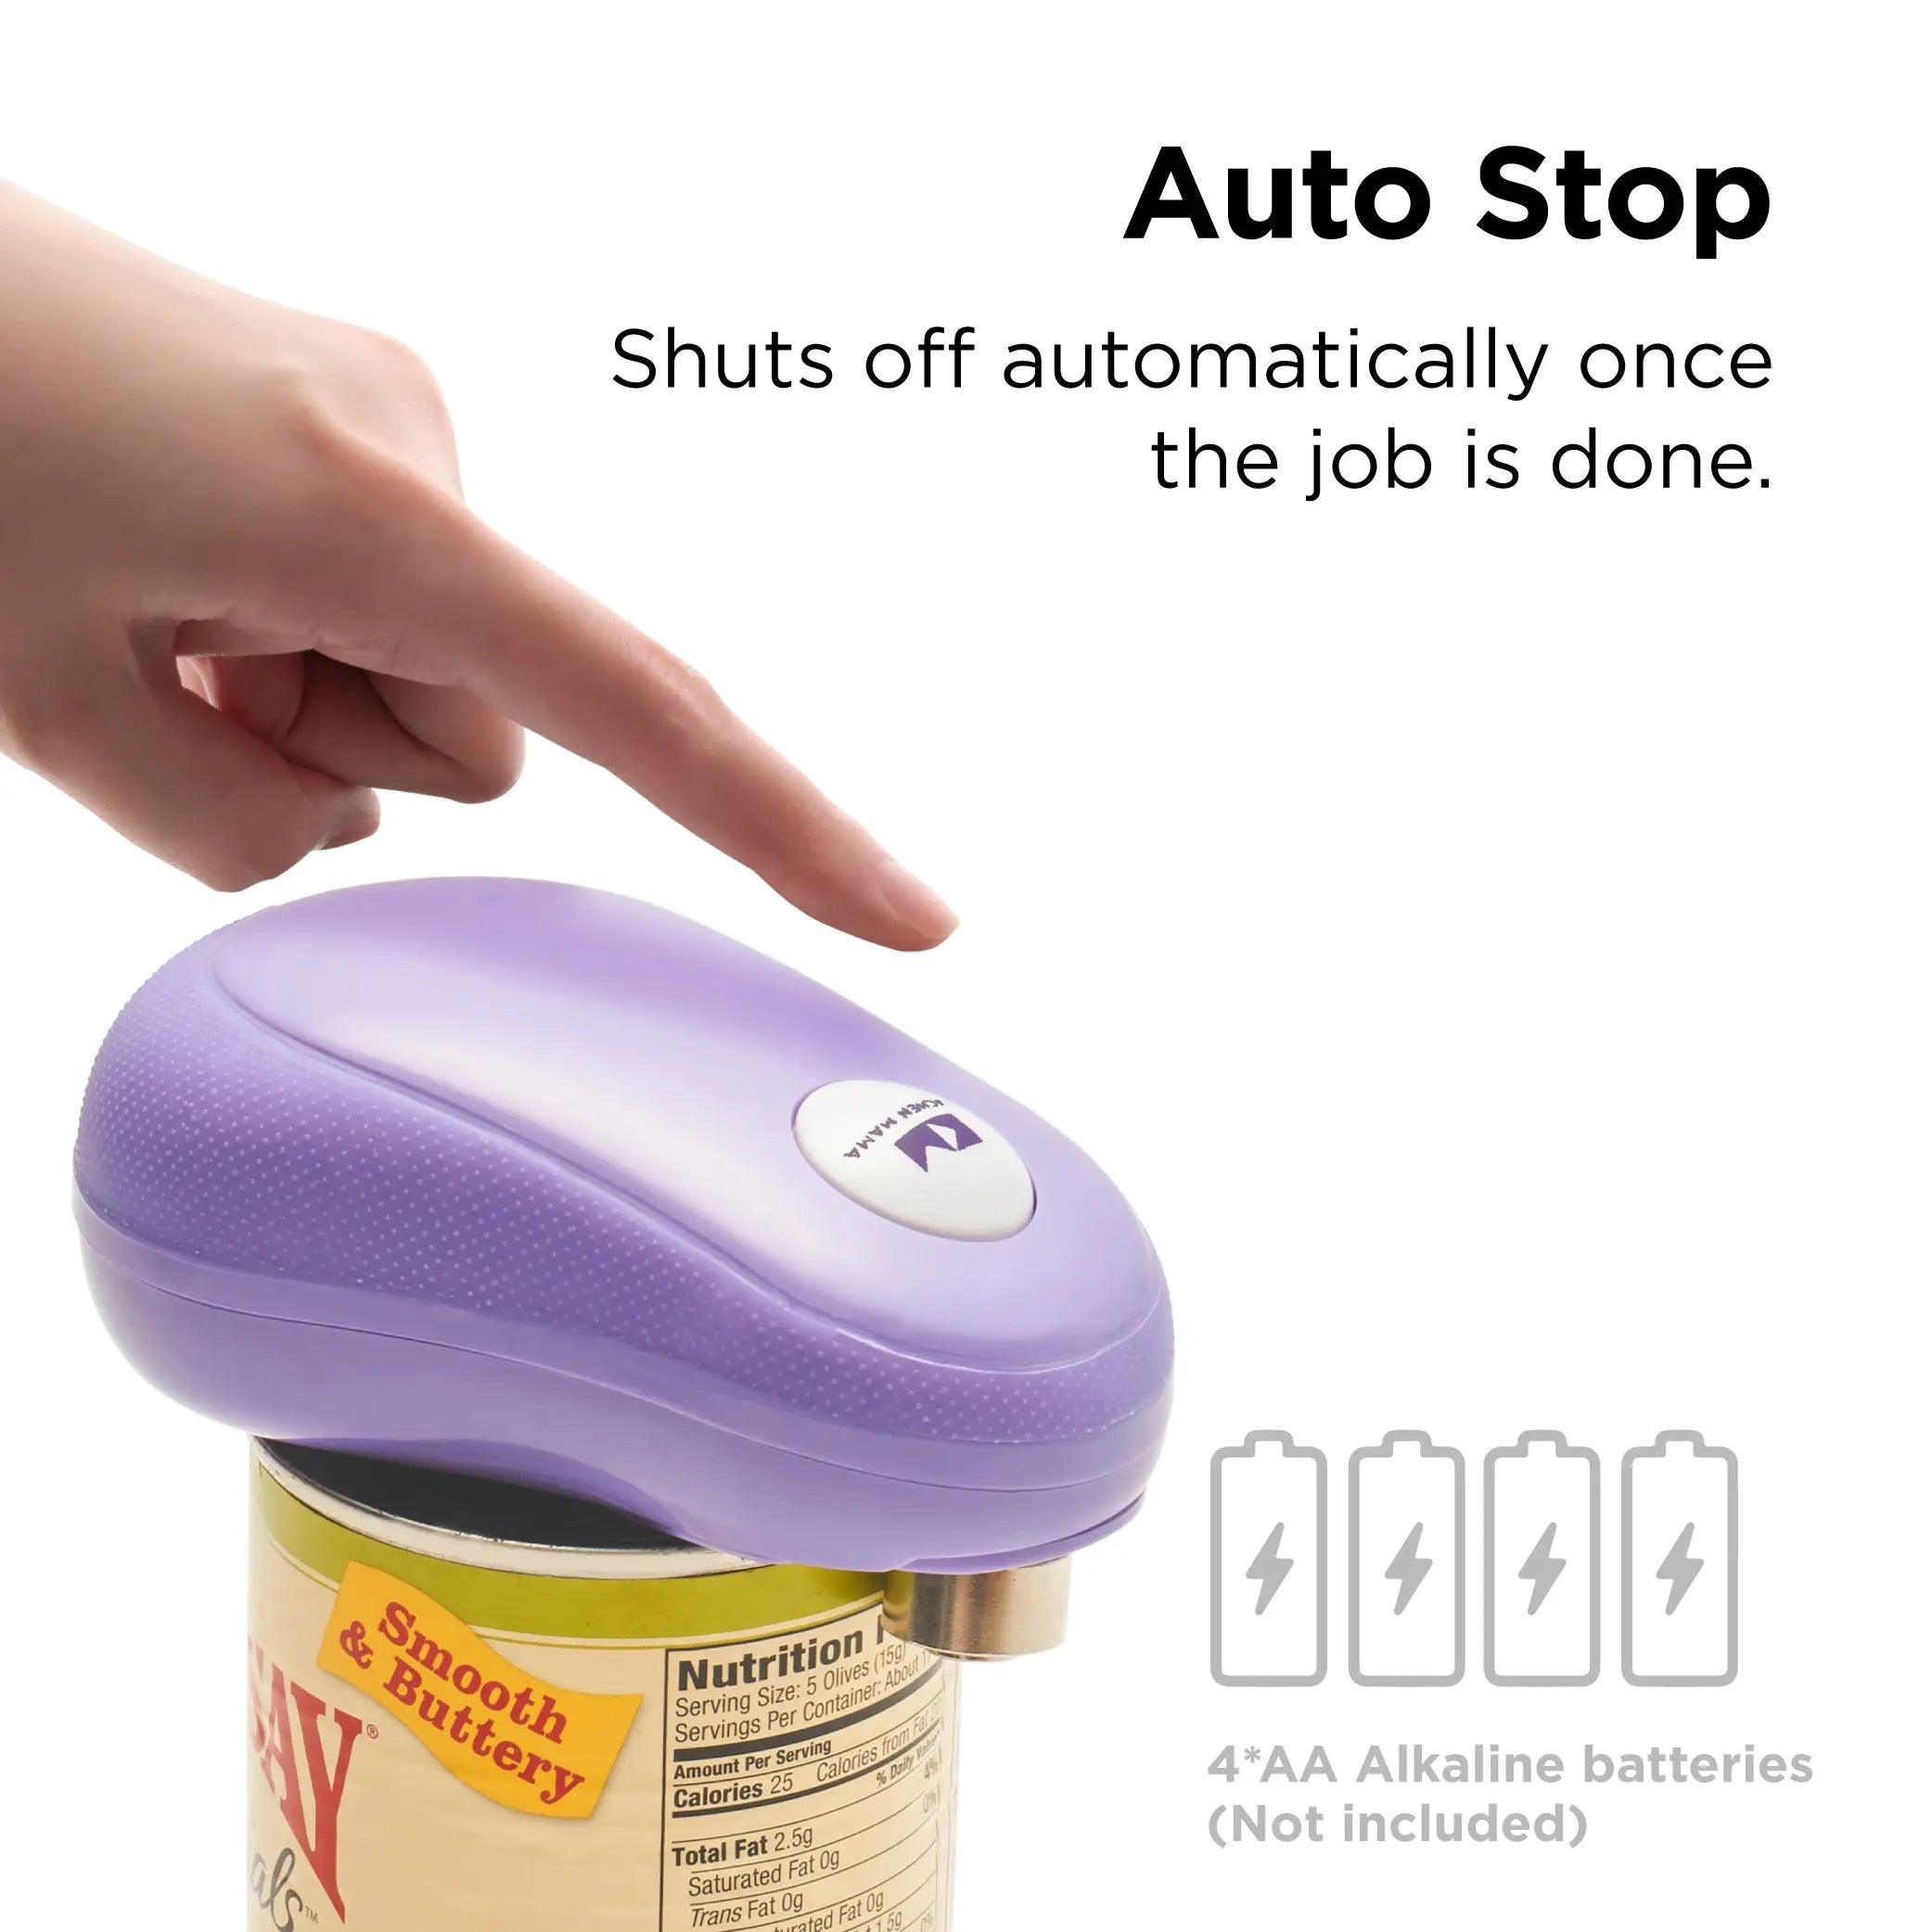 Can Opener, One Touch Switch Automatic Can Opener Smooth Edge,Best Kitchen  Gadgets Electric Can Openers For Seniors With Arthritis,Restaurant Can